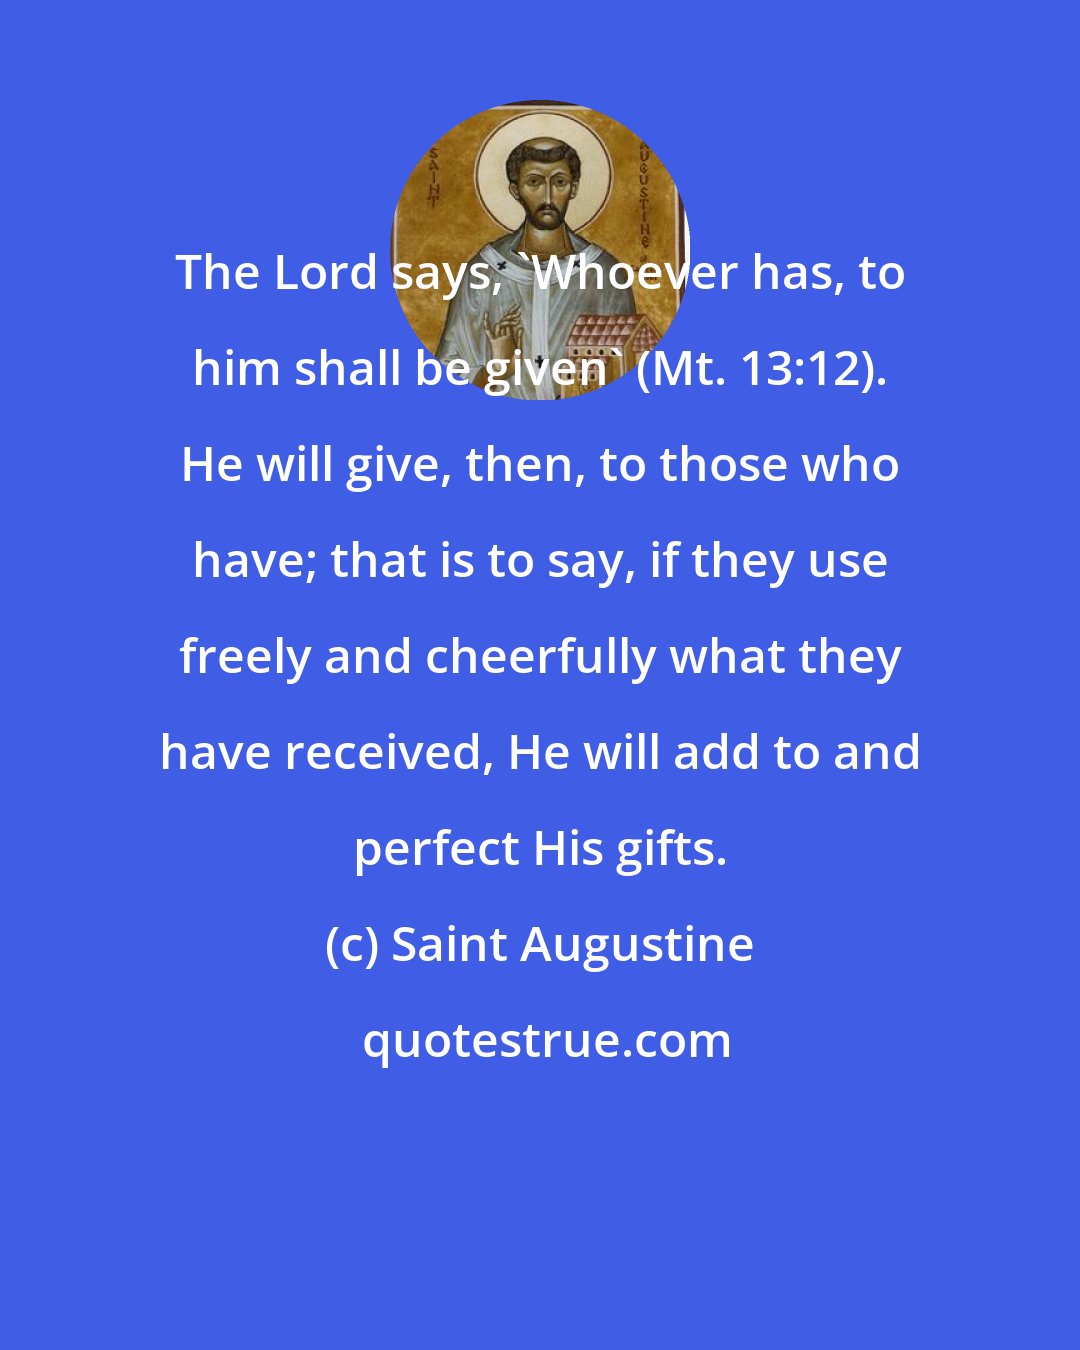 Saint Augustine: The Lord says, 'Whoever has, to him shall be given' (Mt. 13:12). He will give, then, to those who have; that is to say, if they use freely and cheerfully what they have received, He will add to and perfect His gifts.